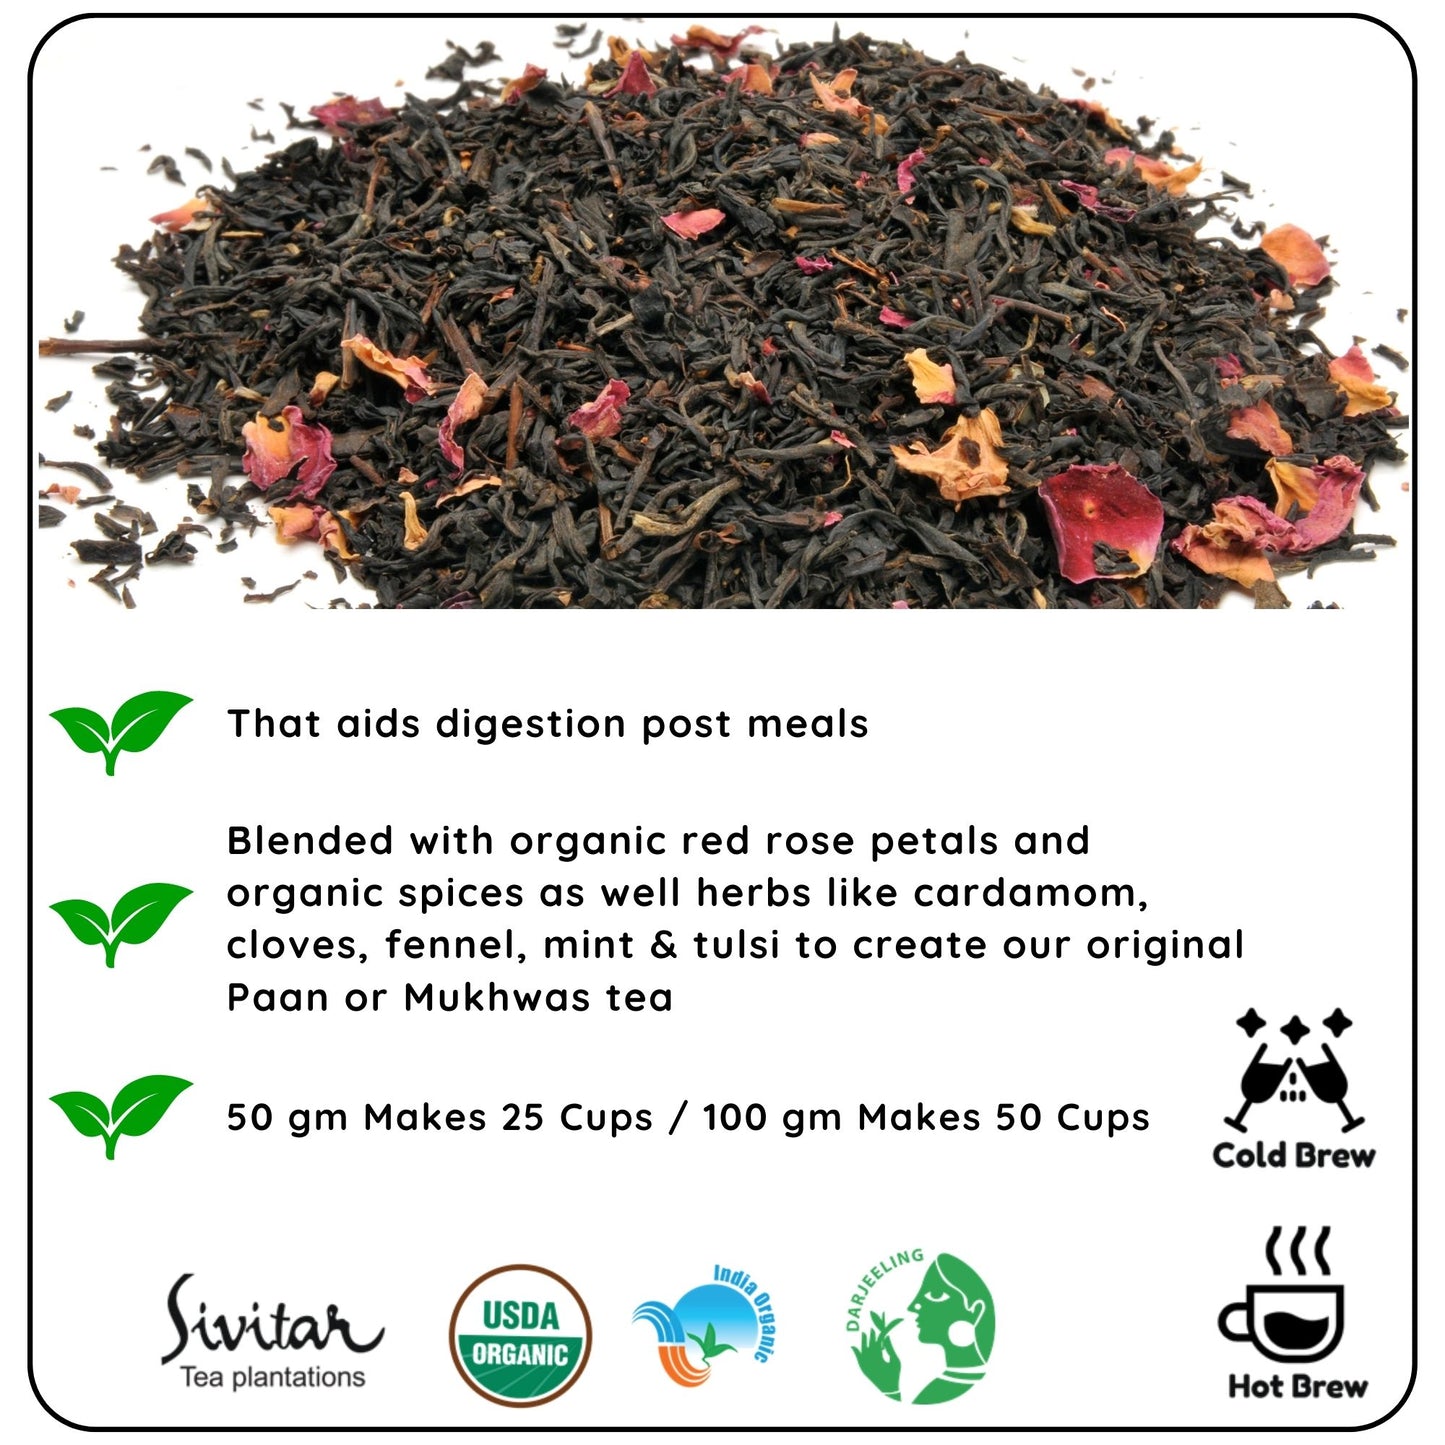 DIGESTIVE Mukhwas Tea - The Benefits of Drinking Digestive Mukhwas Tea for Gut Health and Anxiety Relief - Radhikas Fine Teas and Whatnots